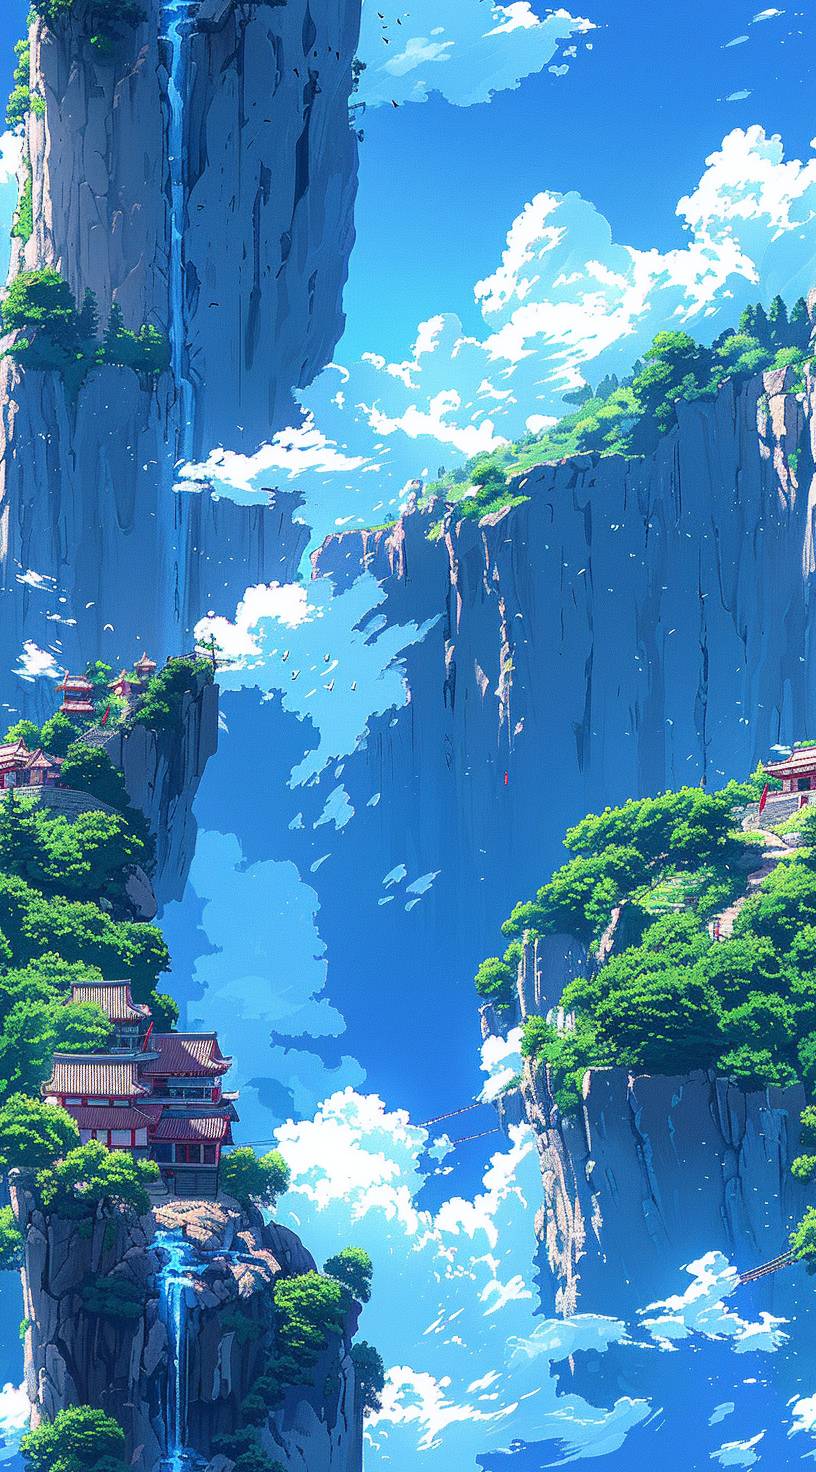 overlooking, castle, castle walls and bridges, unexplored region, winding road, exploration, puddle, cliff, bright style, anime style, key visual, reflection, luggage, cave, cavity-chaos 20-AR 5:9-tile-style raw-stylize 990-version 6.0